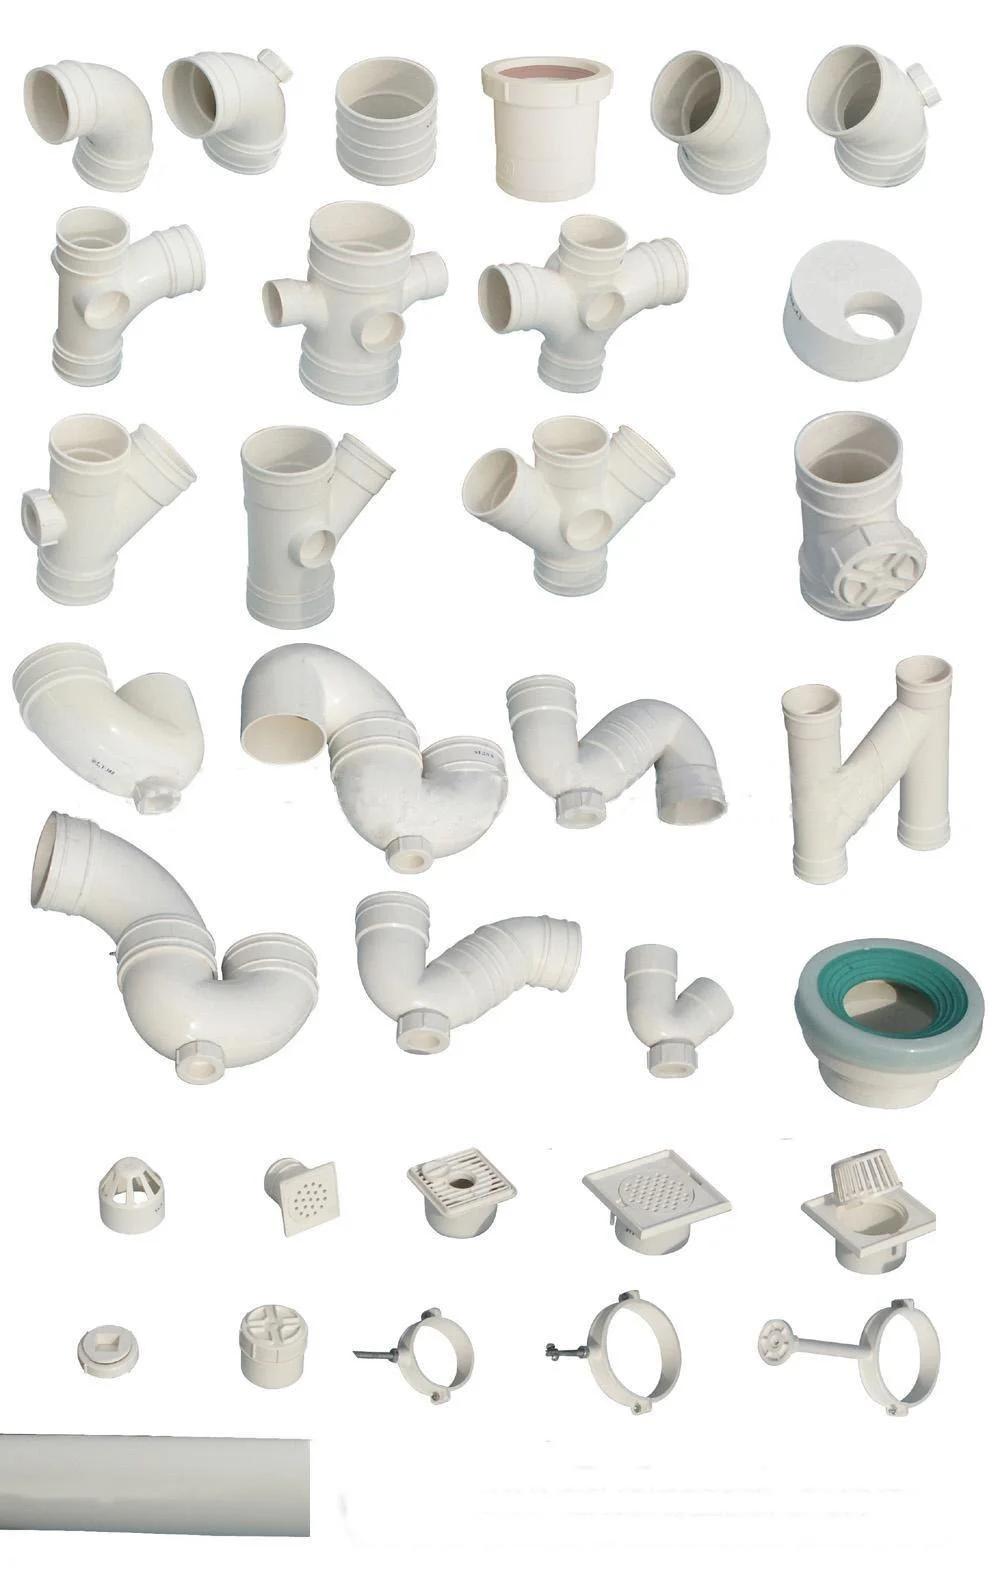 PVC Pipe Fittings, Tee, 45 Lateral, Reducing Tee